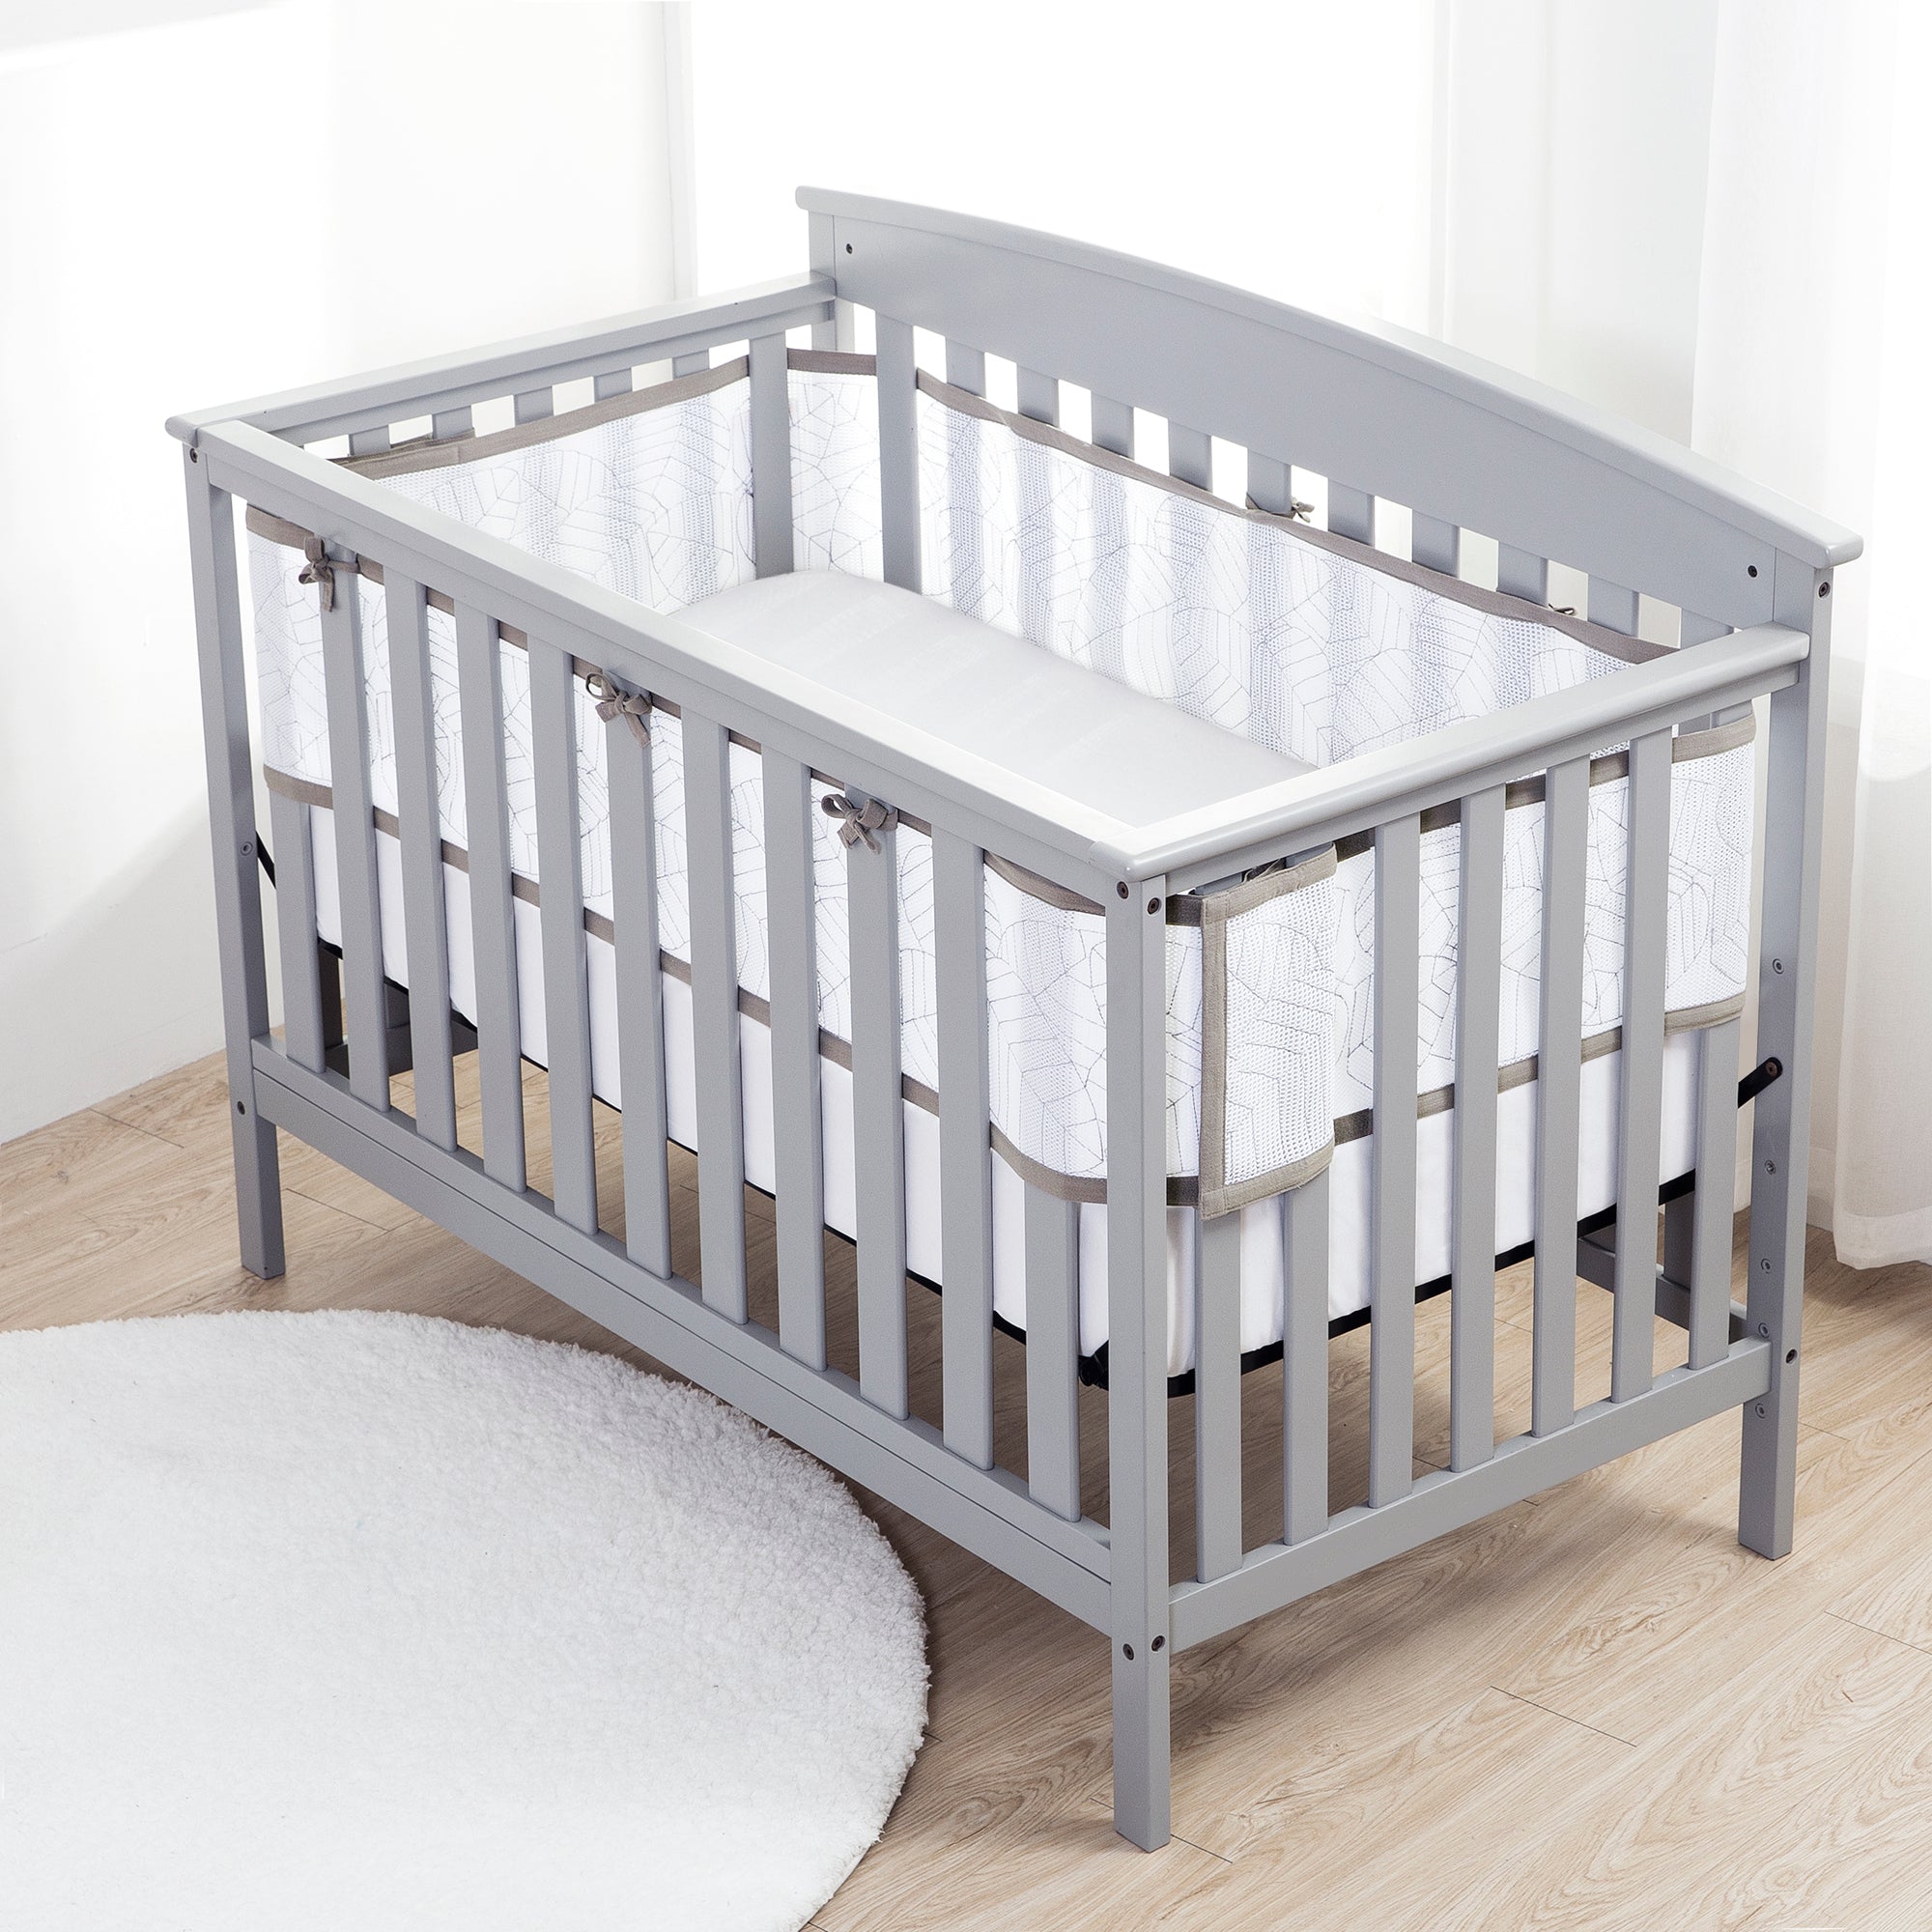 BreathableBaby Breathable Mesh Liner for Full-Size Cribs, Classic 3mm Mesh,  White (Size 4FS Covers 3 or 4 Sides)